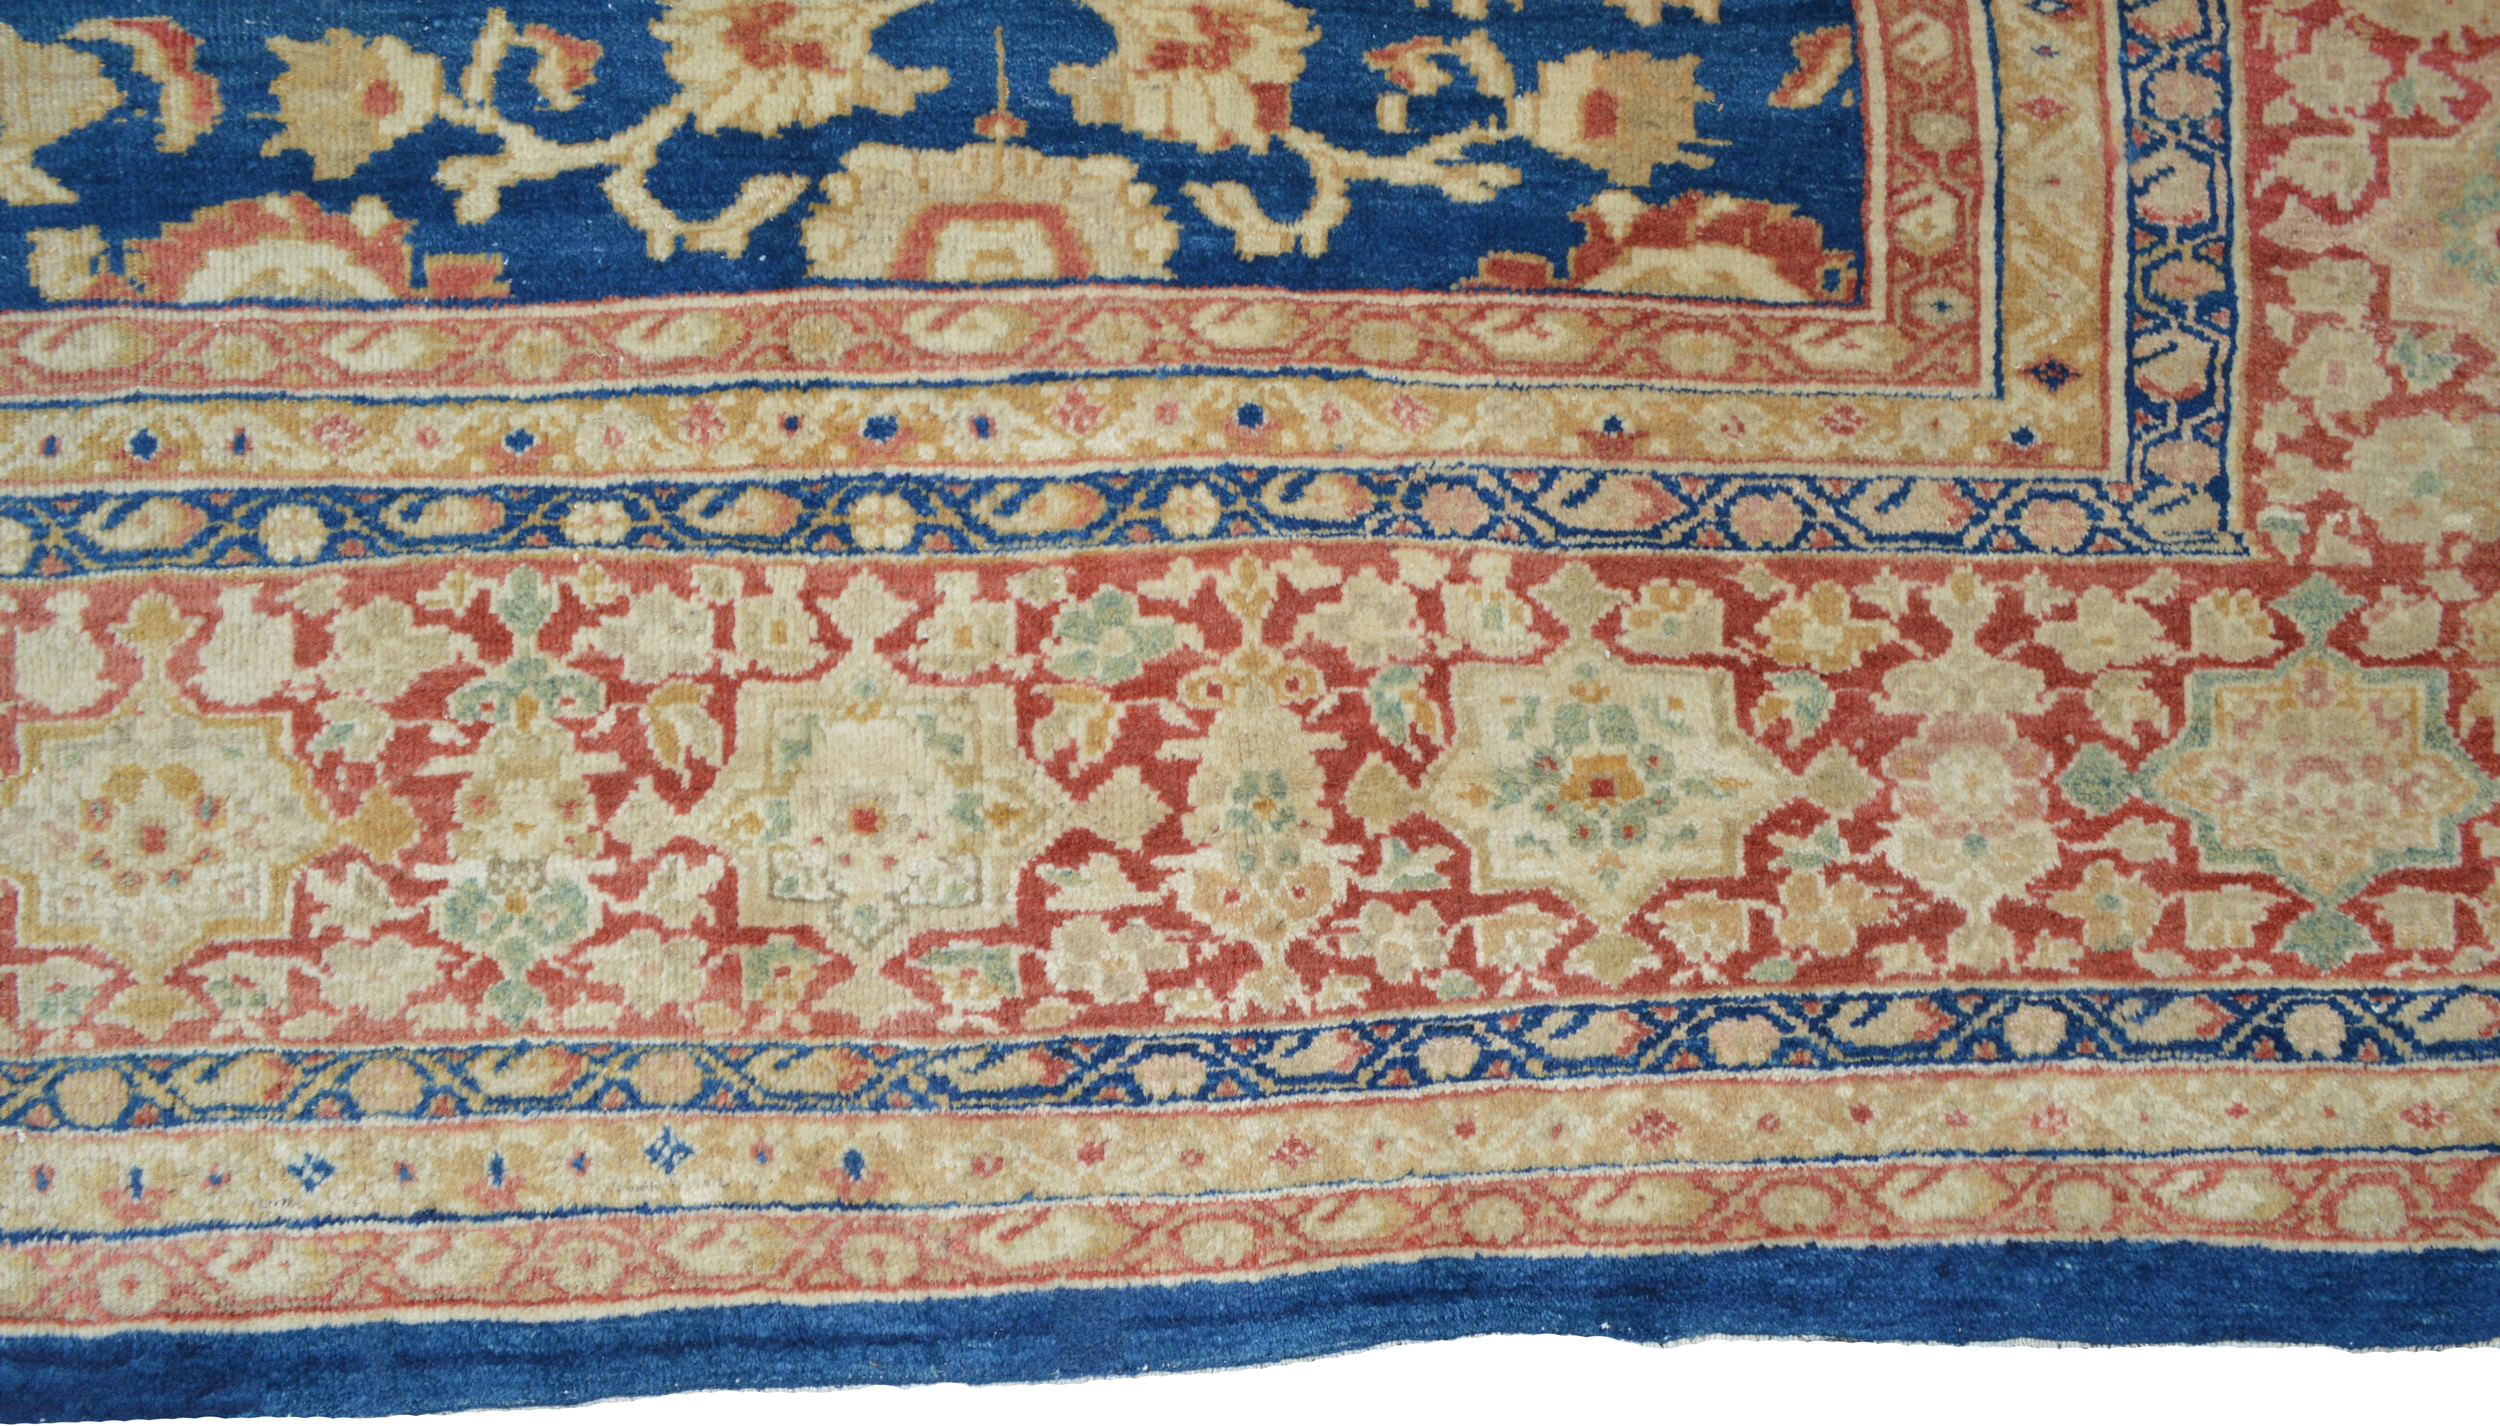 Border detail from an antique Persian Sultanabad carpet